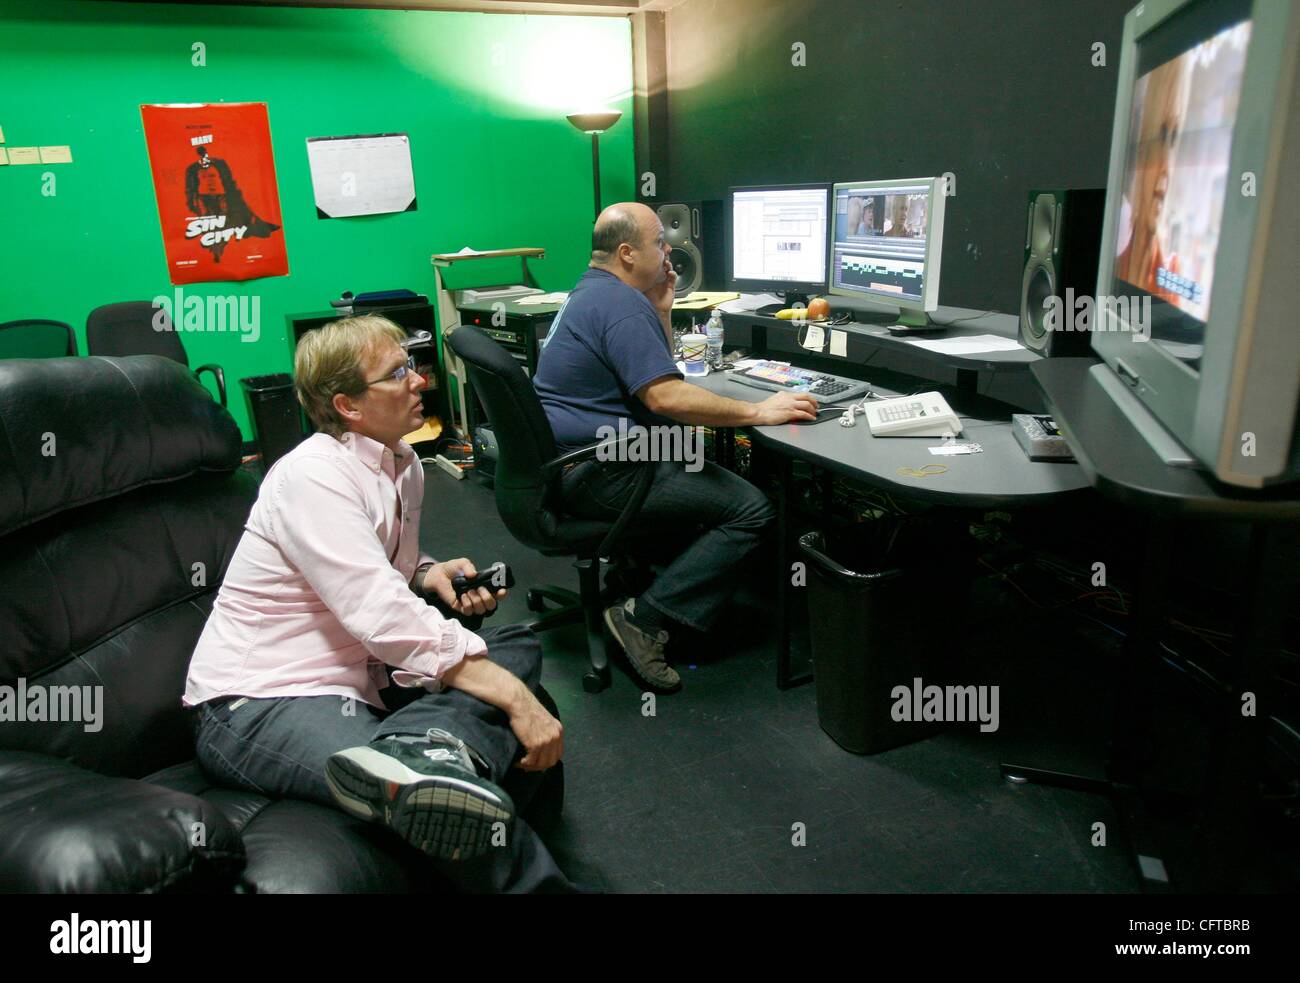 Film director Del Shores who created “Sordid Lives” play, film and now a new television series by the same name, is photographed at editing room at the Post Group in Hollywood. (Photo by Ringo Chiu / Zuma Press) Stock Photo